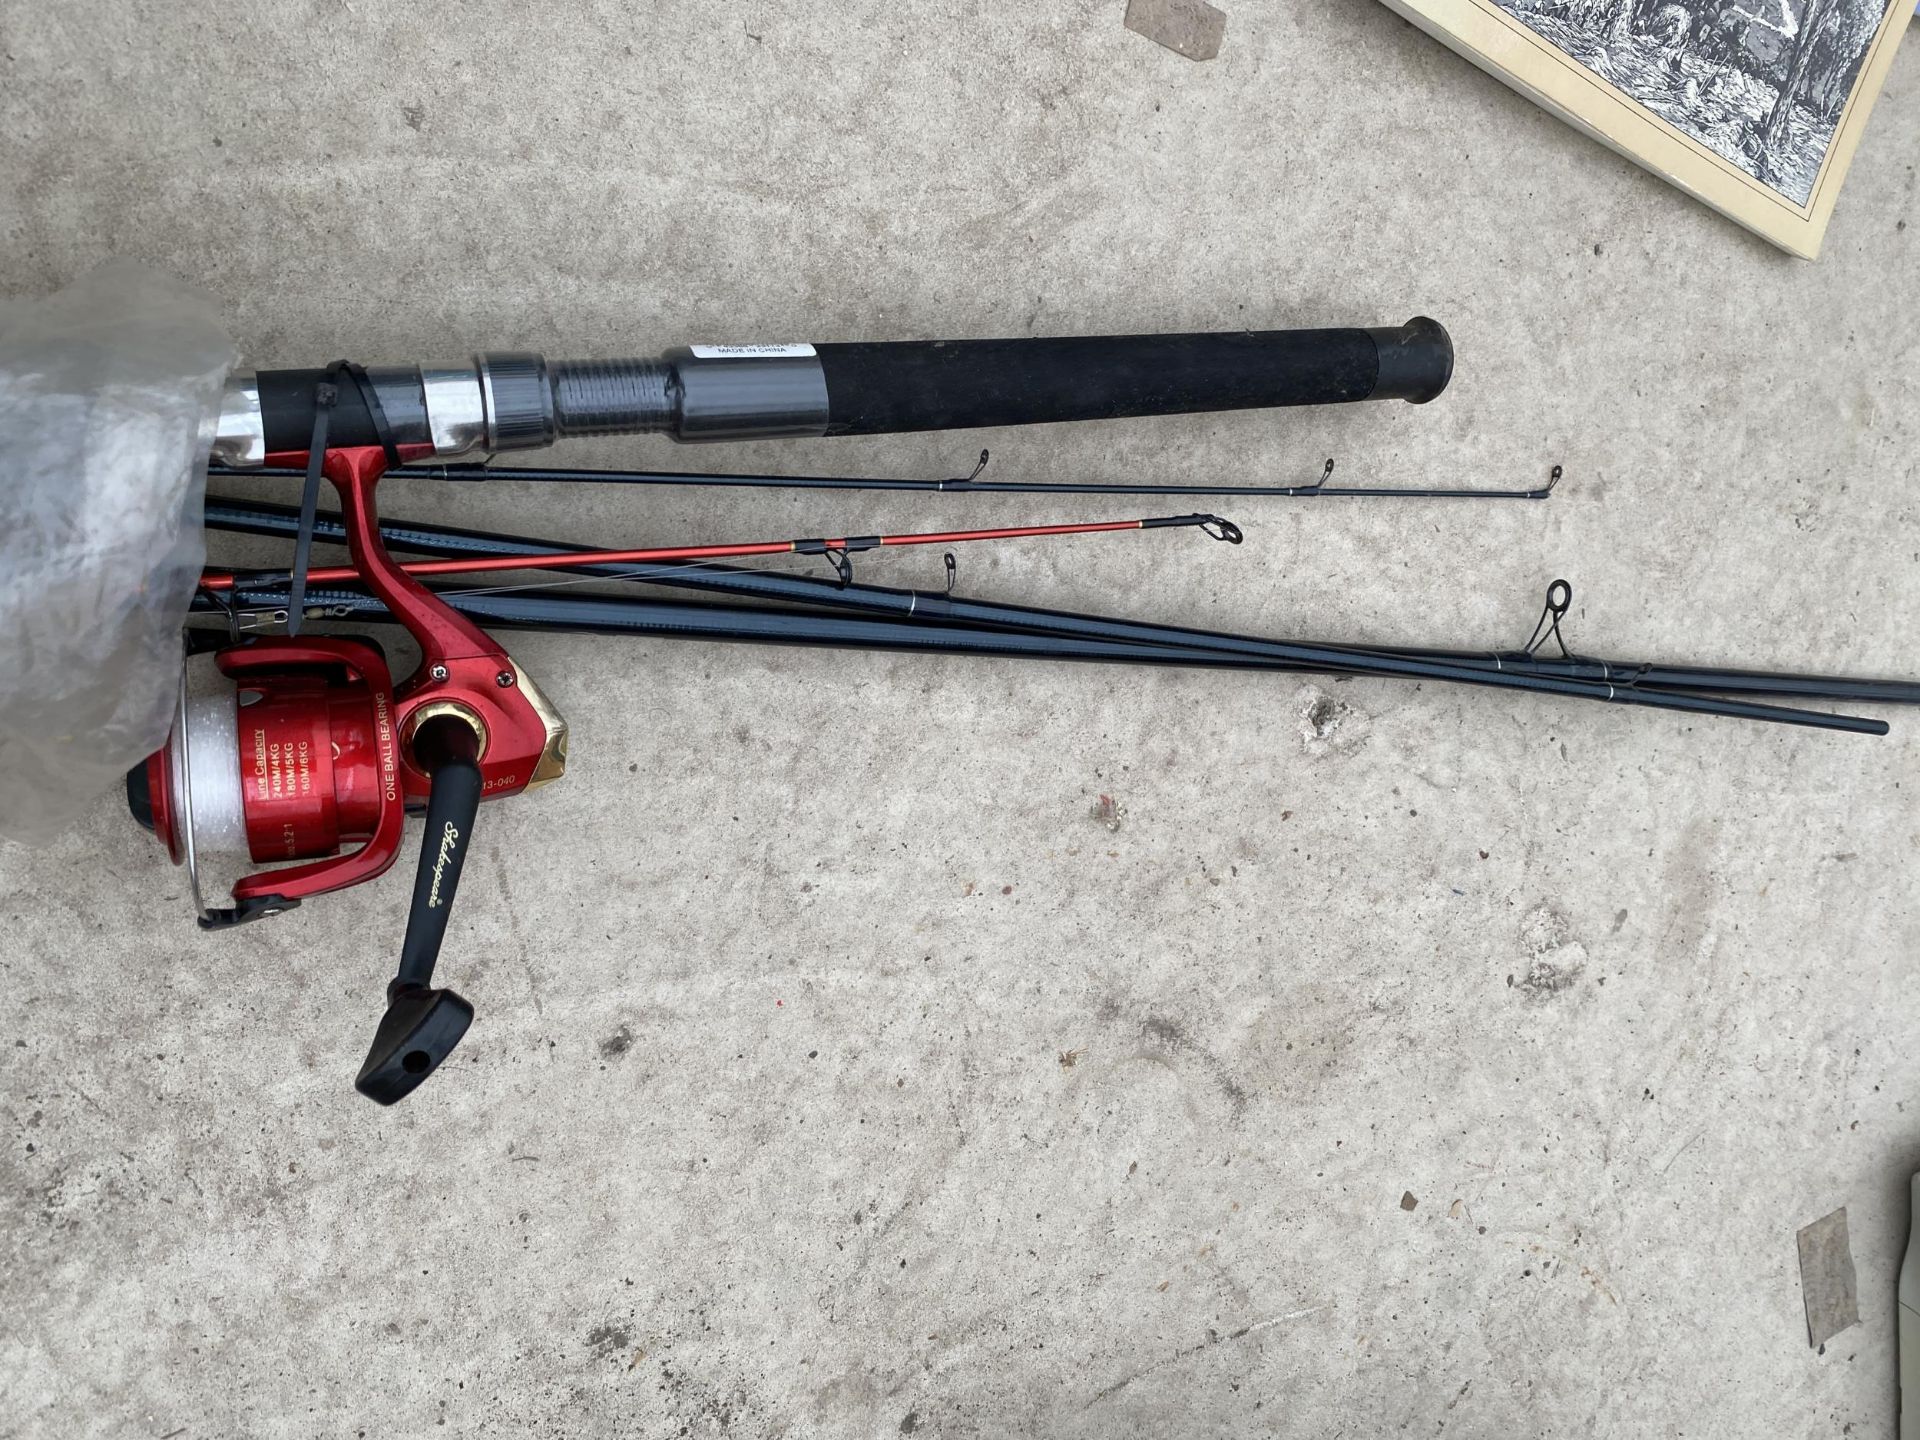 A FIREBIRD FISHING ROD WITH REEL - Image 2 of 2